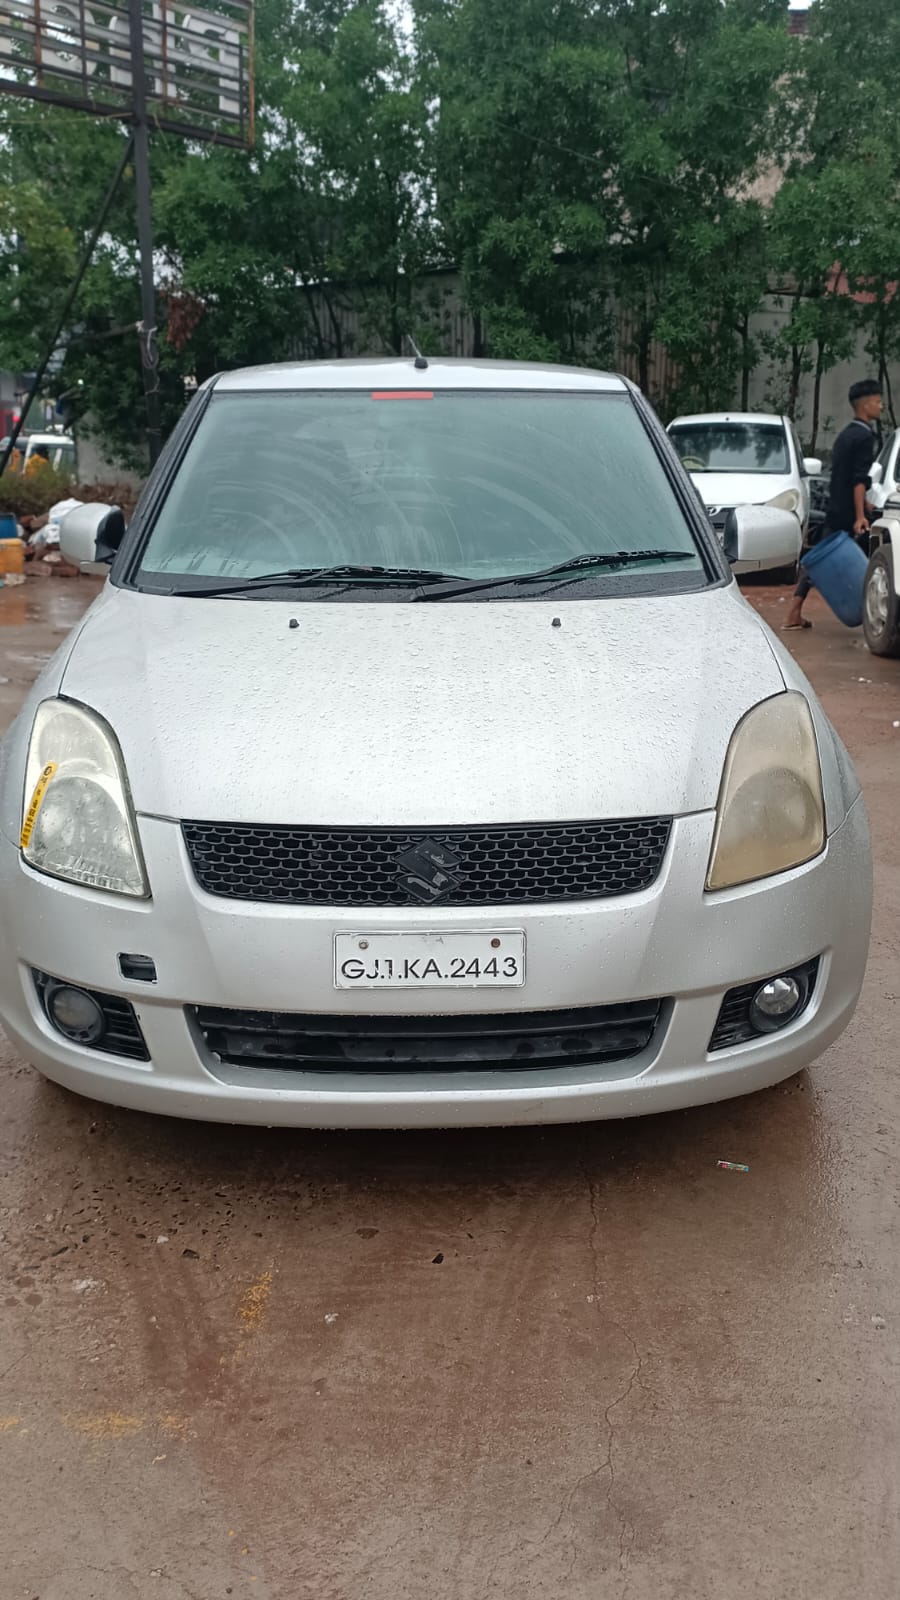 Details View - Maruti Suzuki swift photos - reseller,reseller marketplace,advetising your products,reseller bazzar,resellerbazzar.in,india's classified site,Maruti Suzuki swift , Old Maruti Suzuki swift , Used Maruti Suzuki swift in Ahmedabad , Maruti Suzuki swift in Ahmedabad